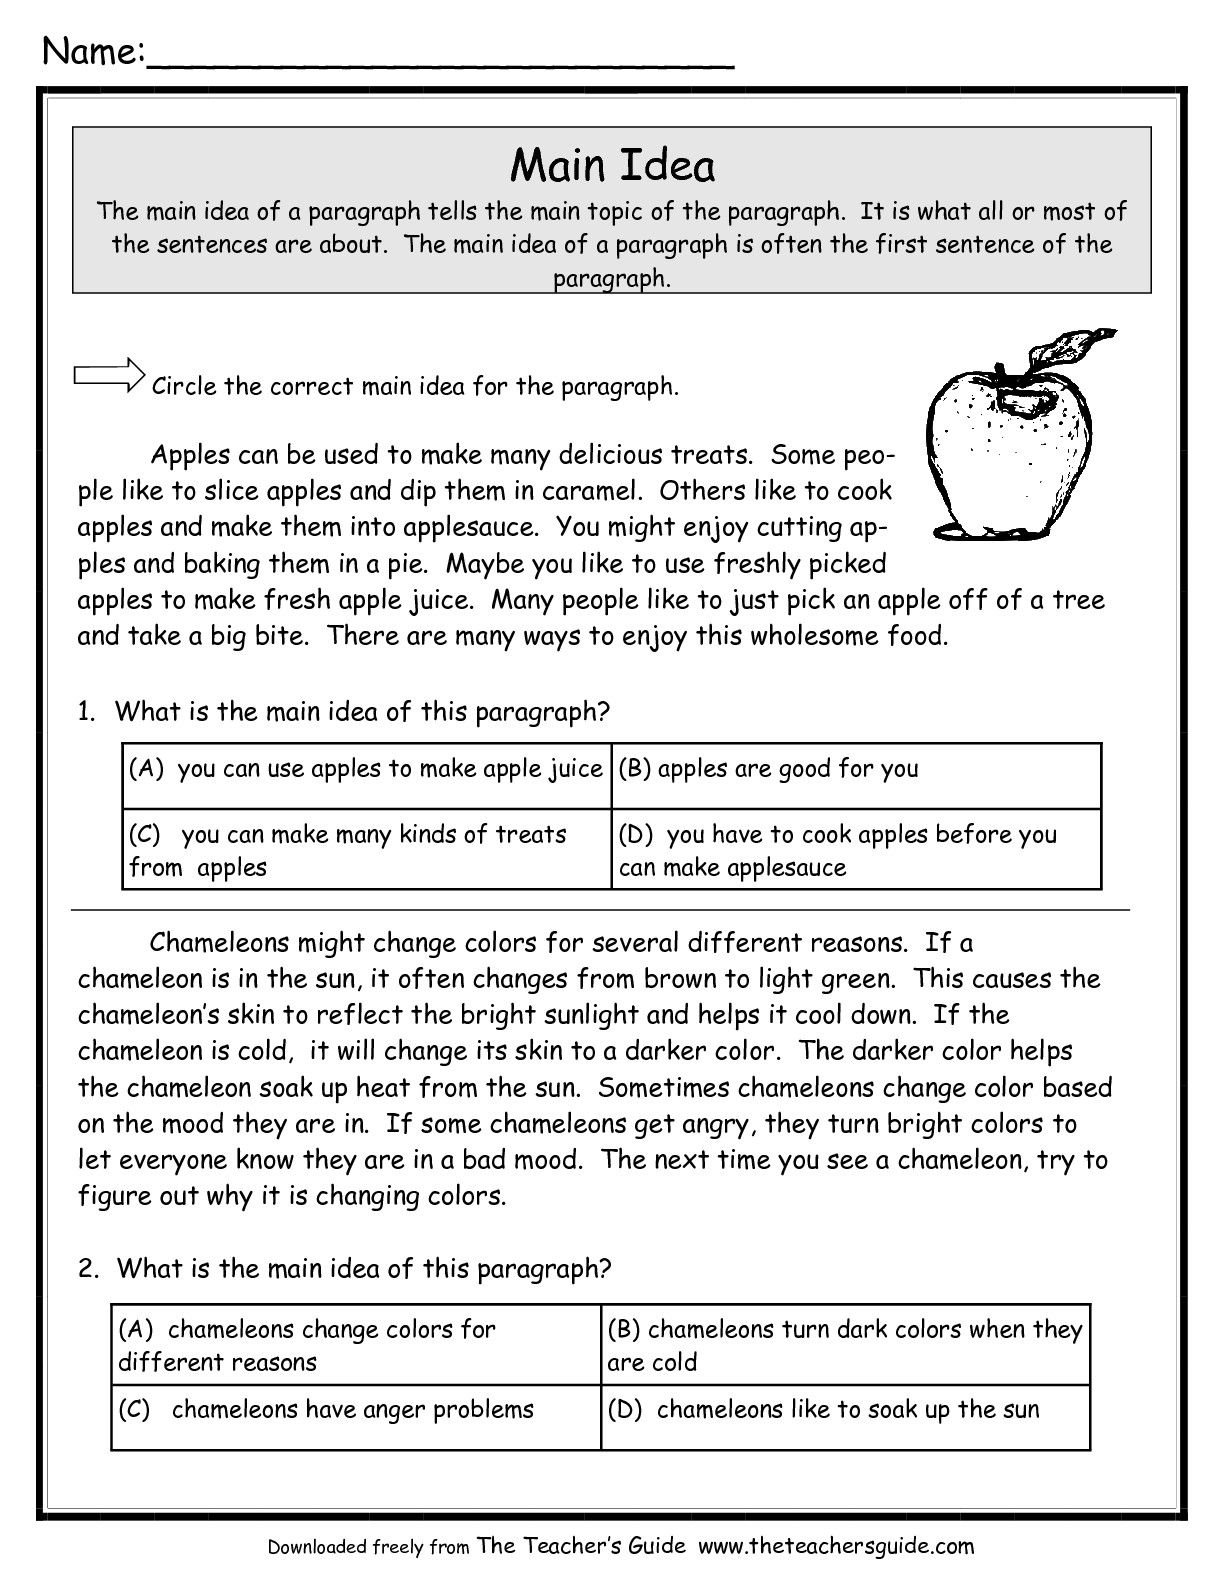 10-ideal-finding-the-main-idea-worksheets-2023